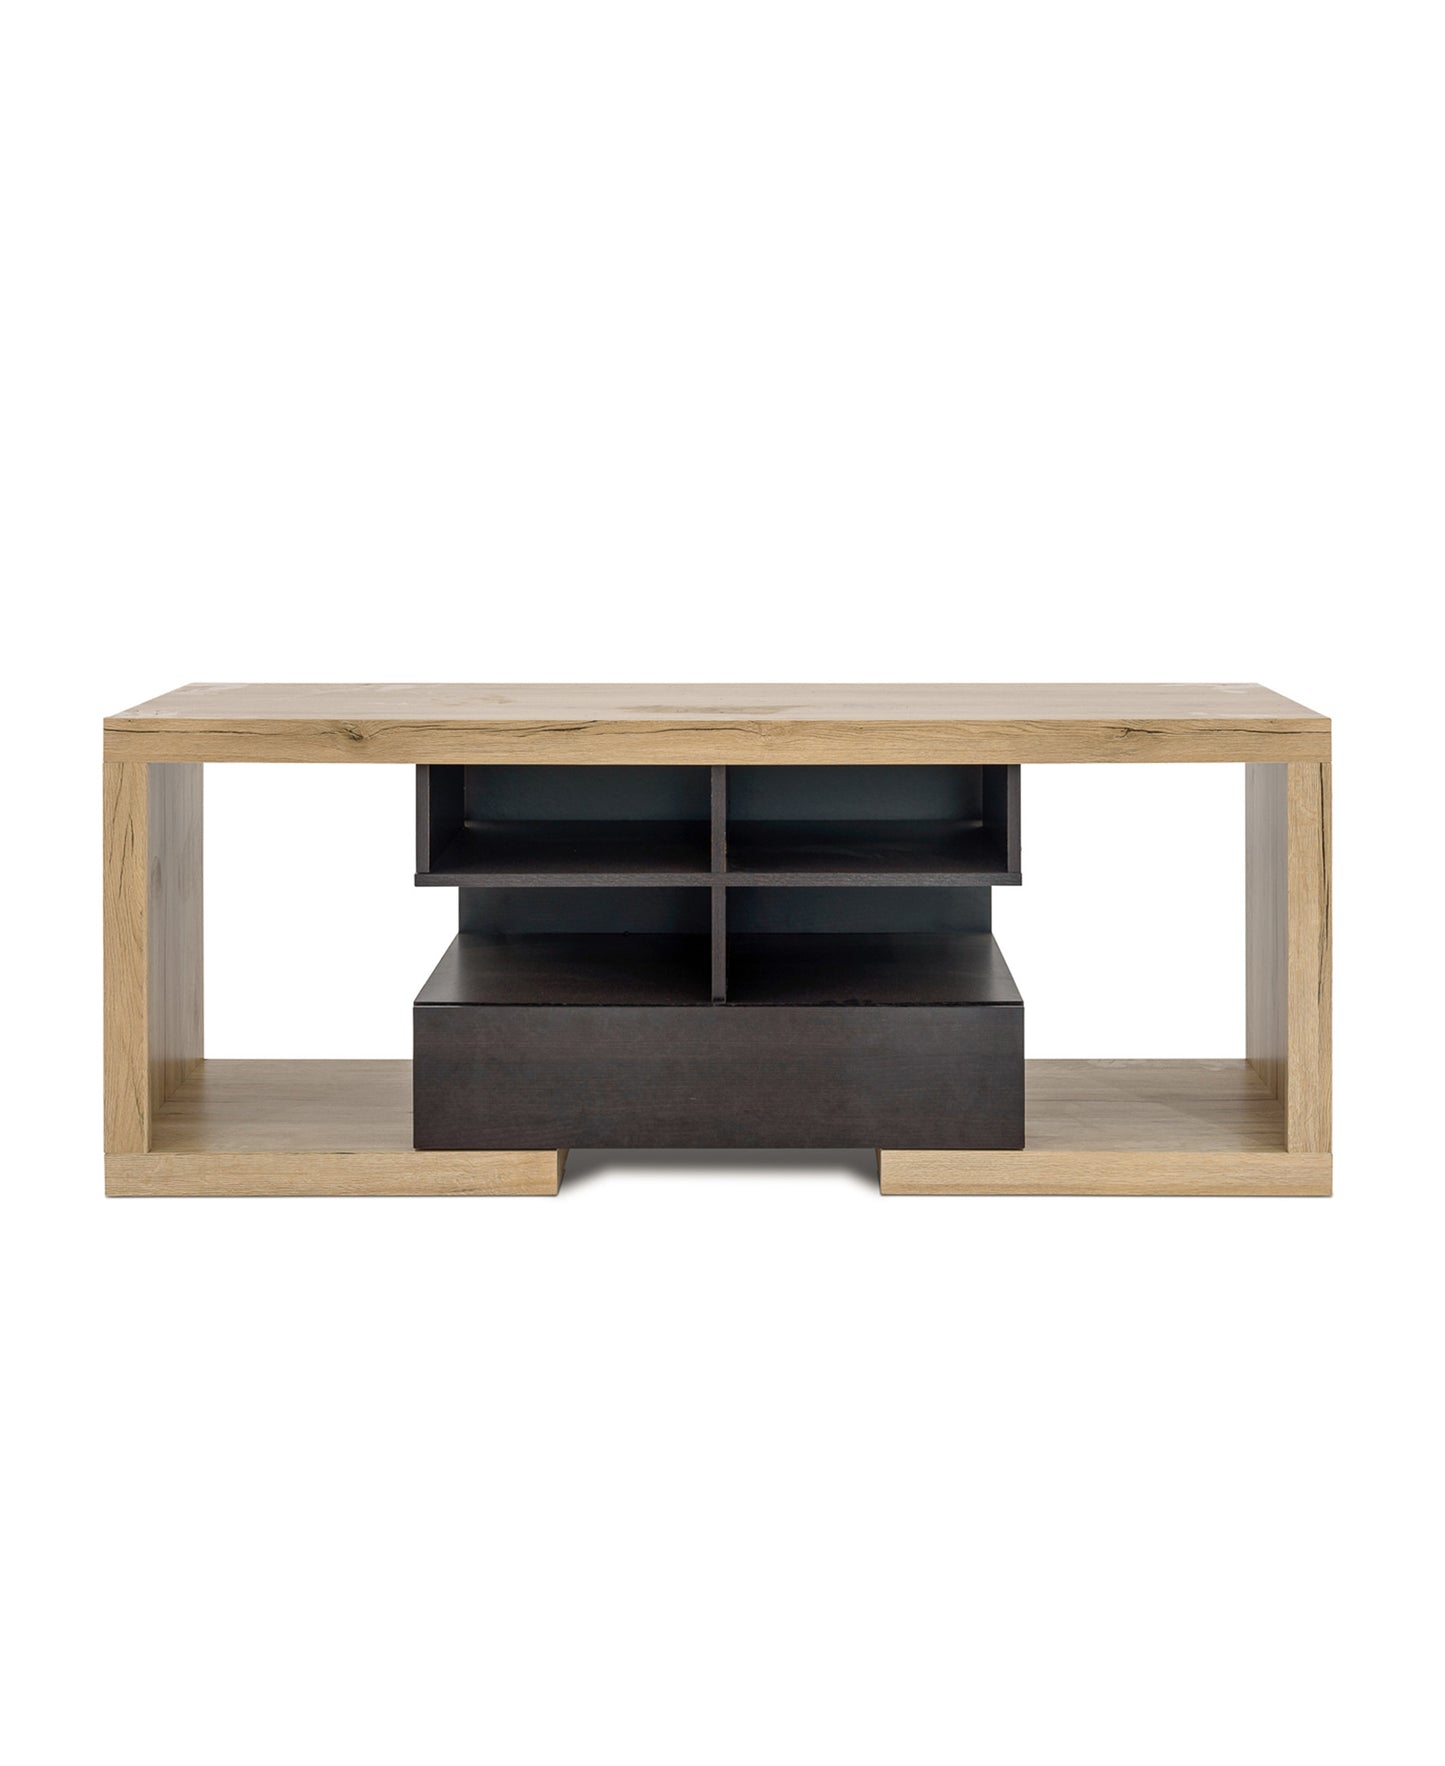 MW-PLS 457 Plasma Wooden TV Stand - Available In 2 Colours